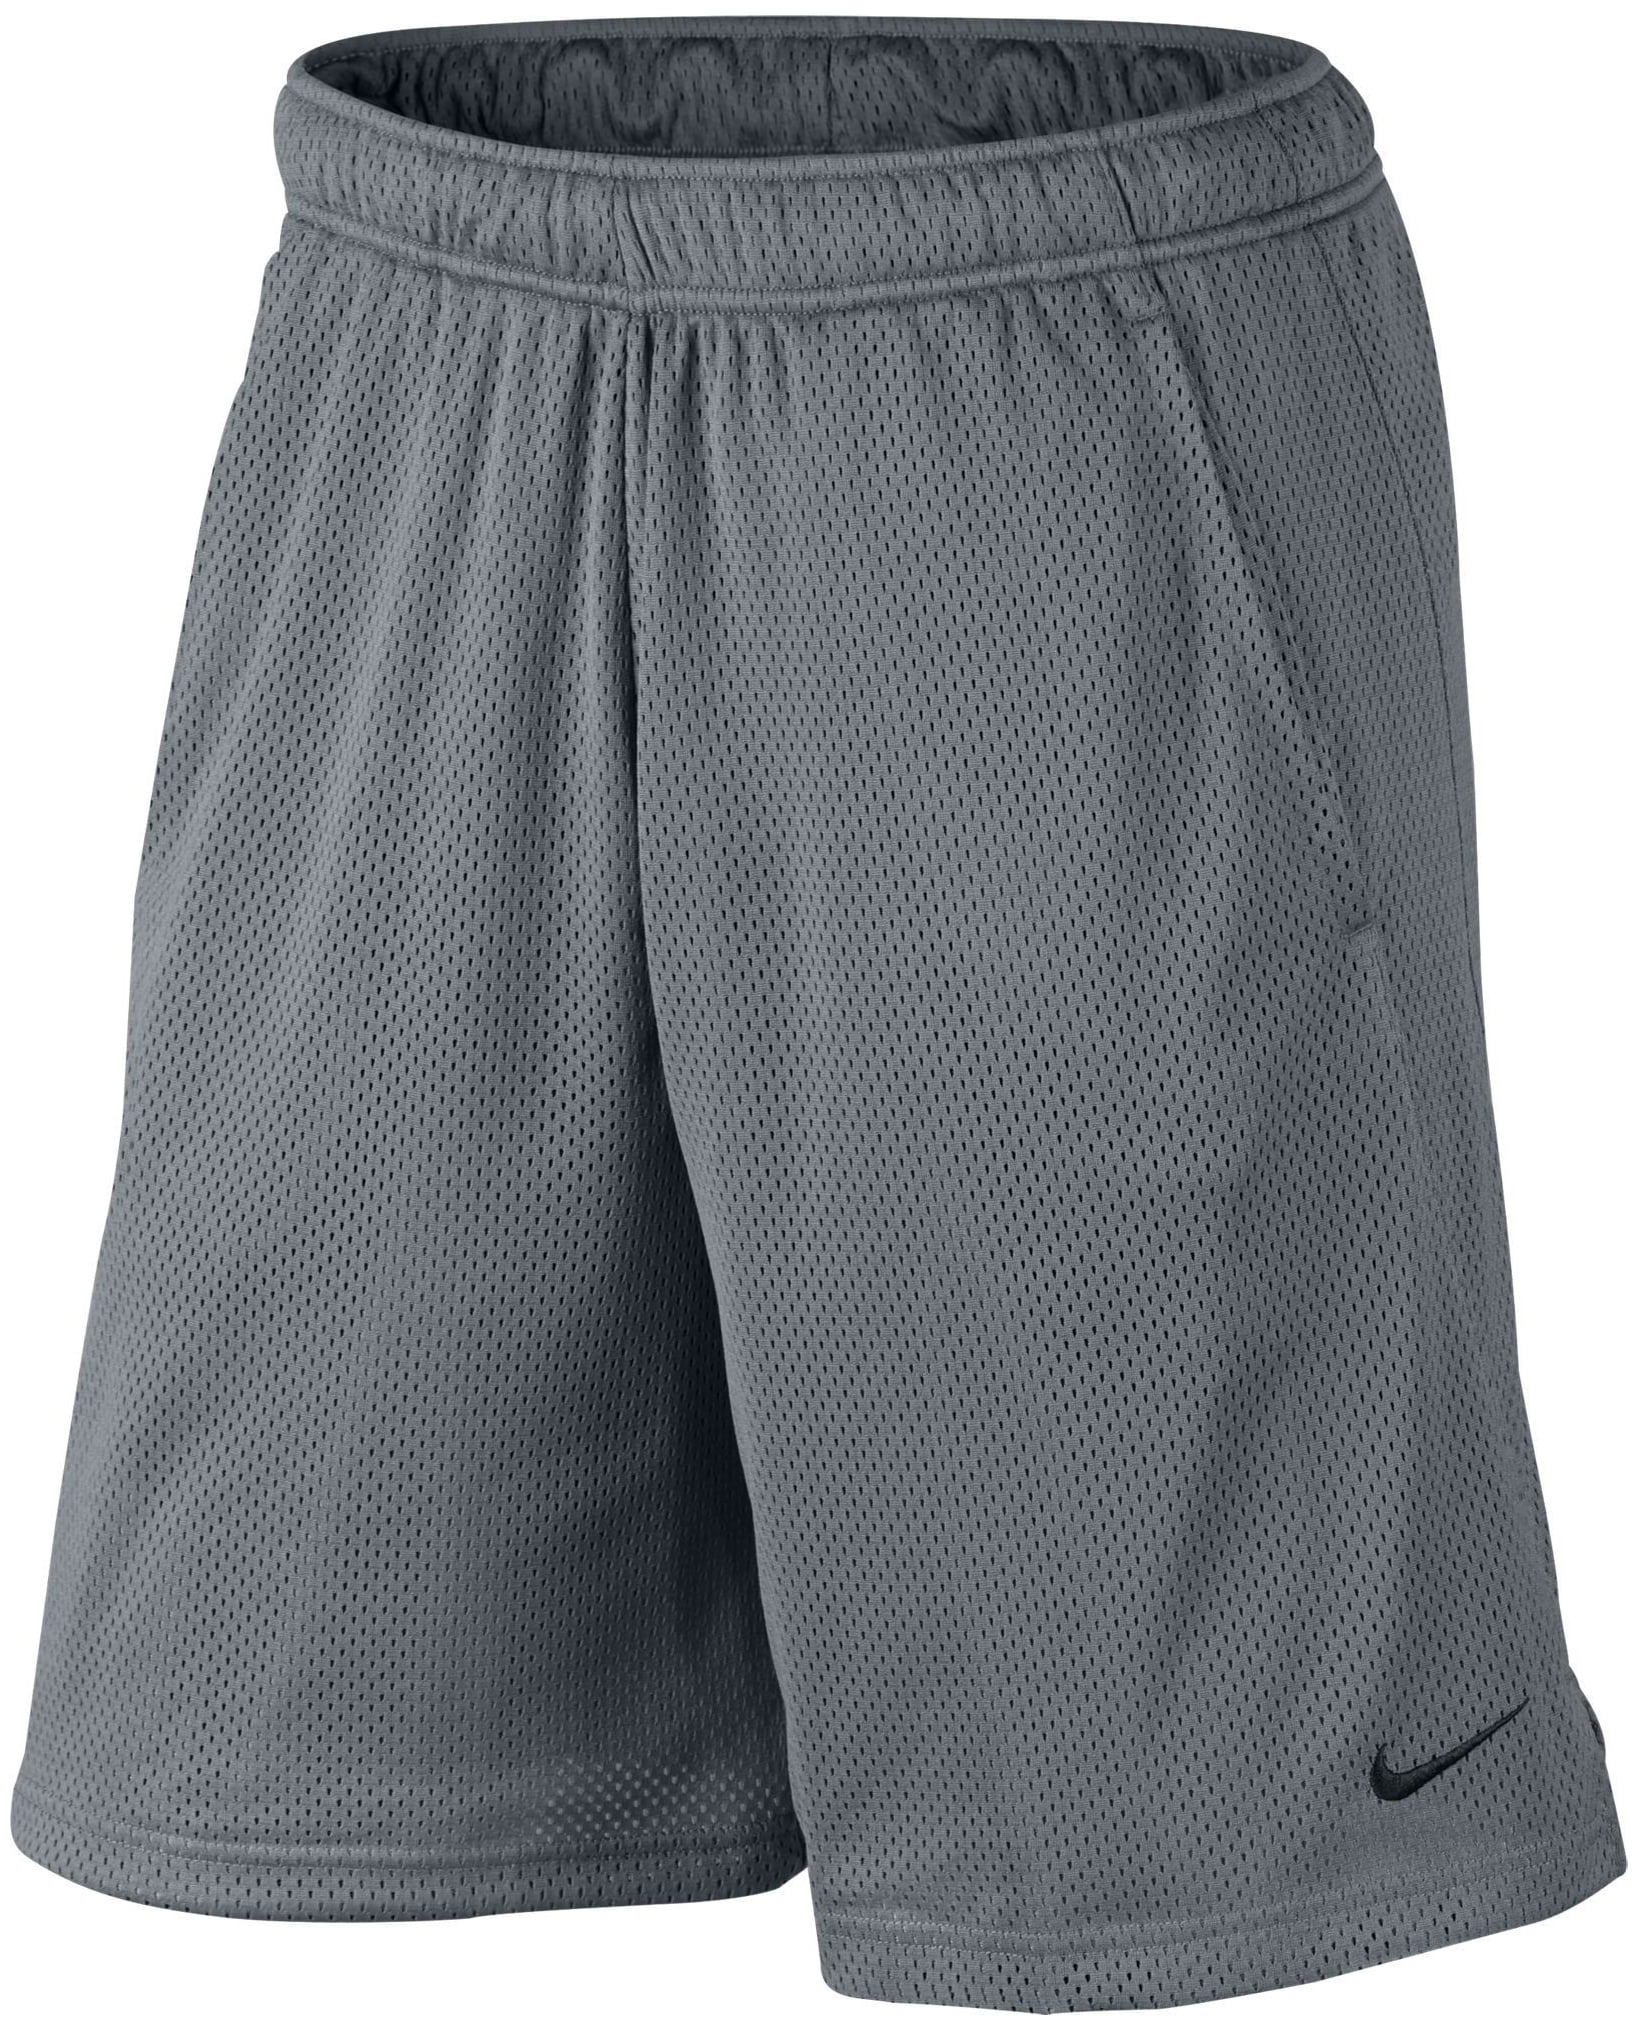 Nike Men's Monster Mesh Shorts Online Outlet, Save 52% | idiomas.to ...